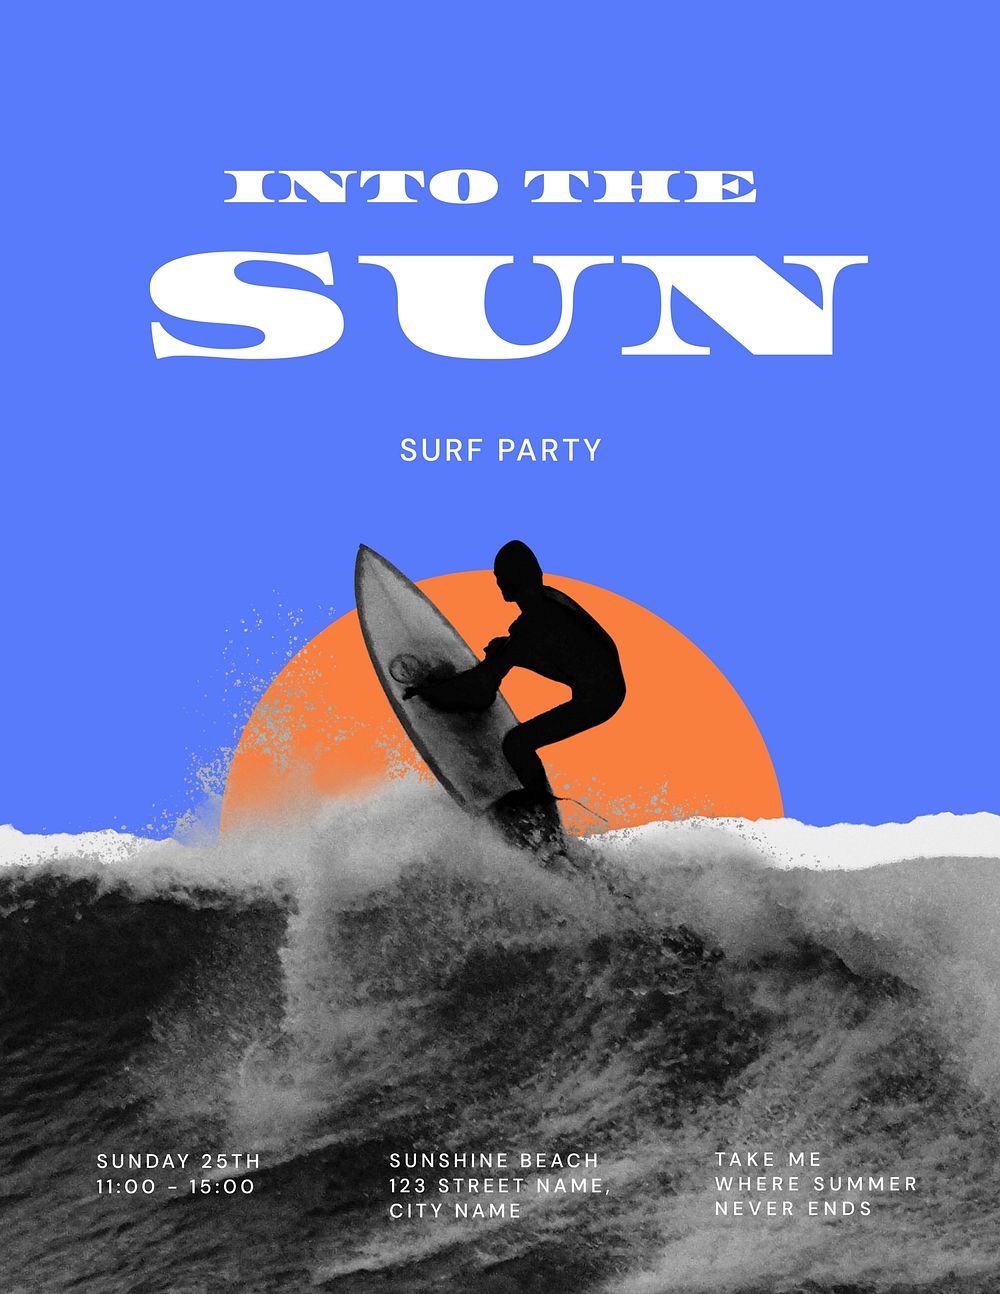 Surfing aesthetic flyer editable template, sunset remix